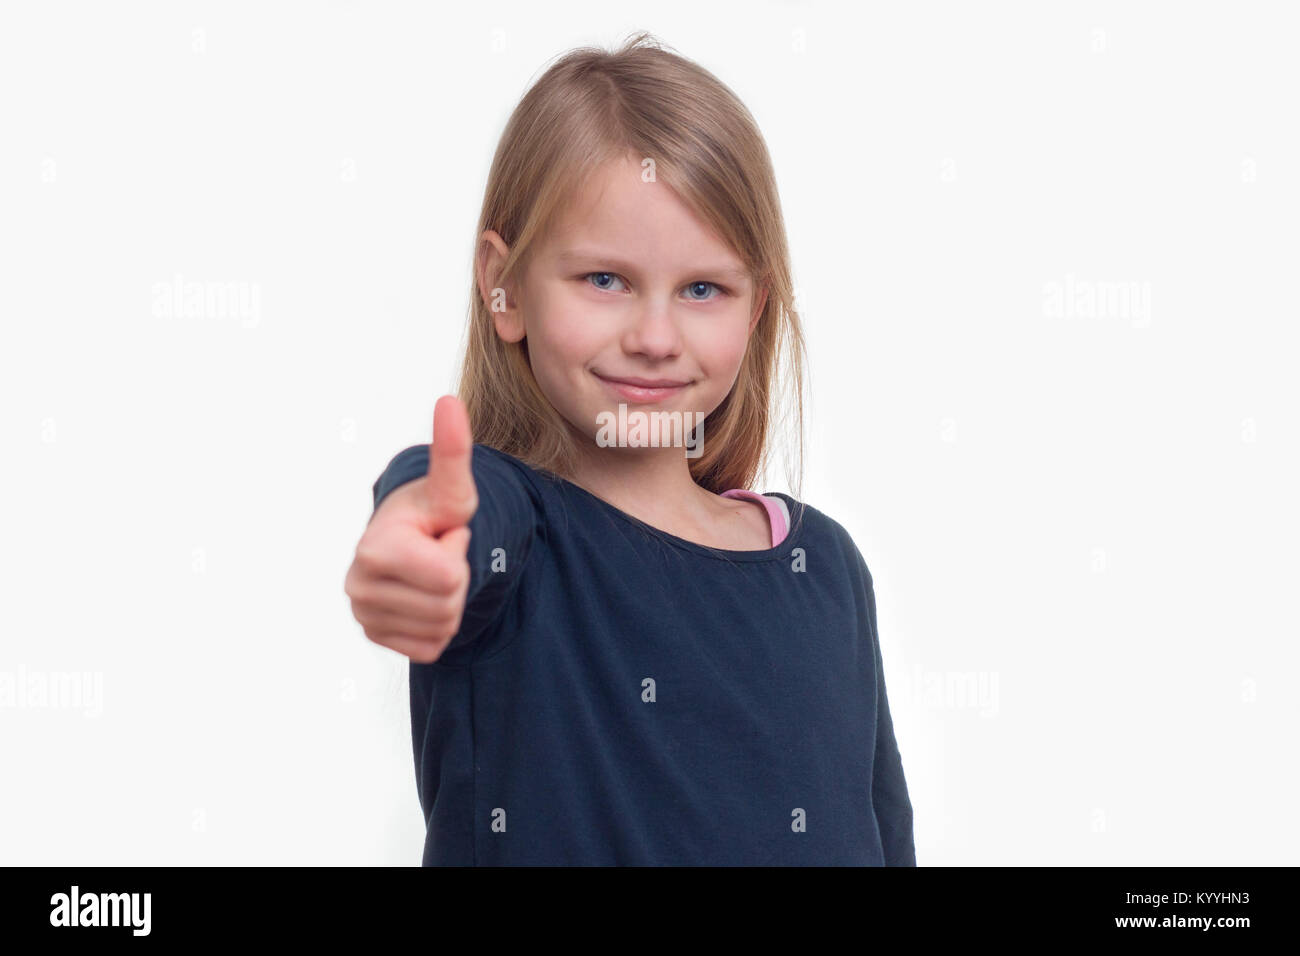 A girl shows his thumb up and gives the sign for Everything OK, Portrait Stock Photo